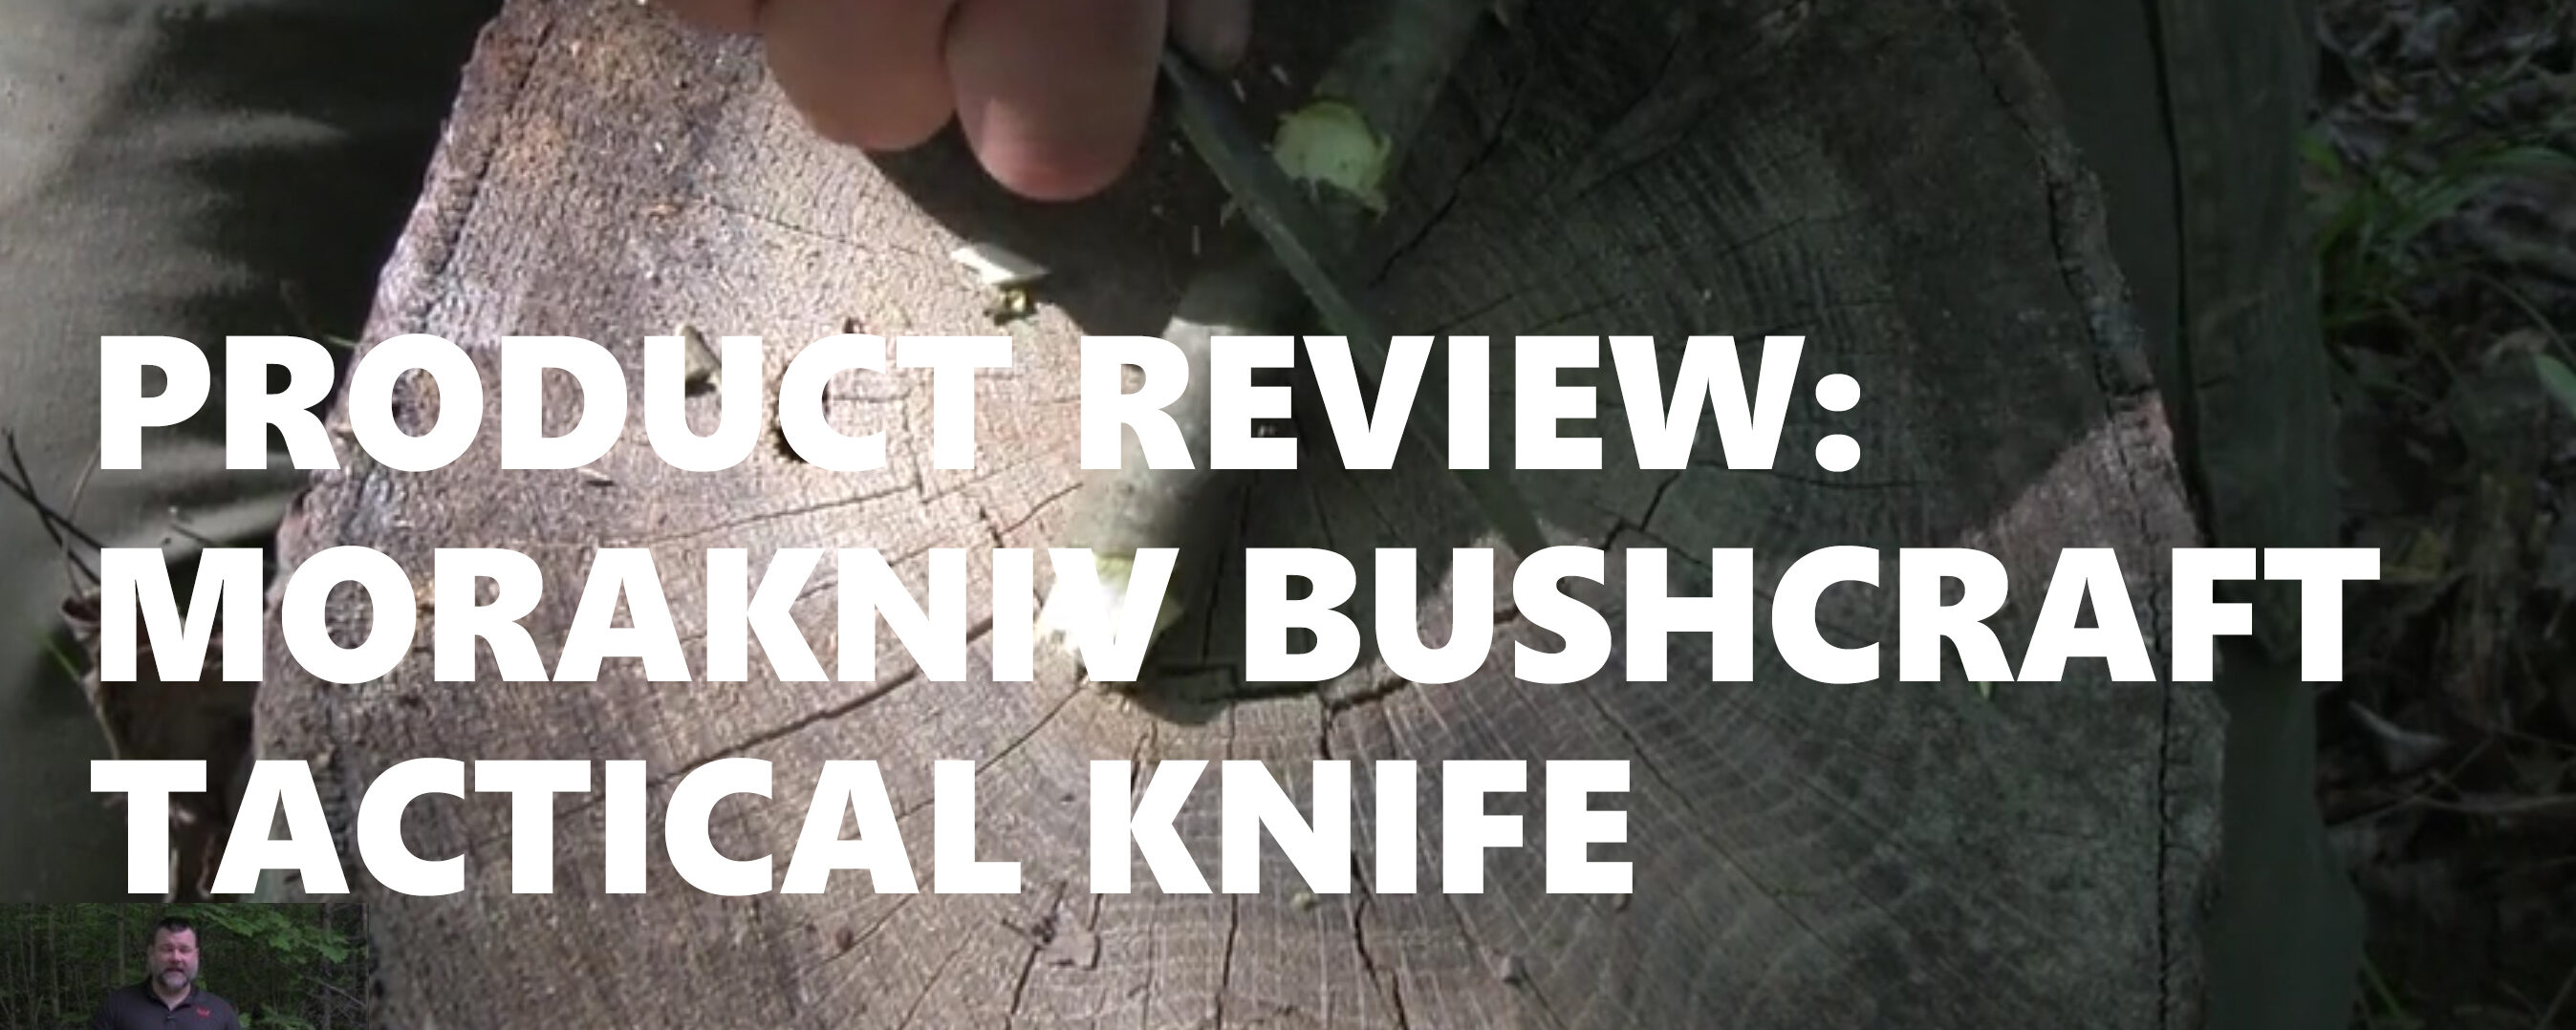 Product Review: Morakniv Bushcraft Tactical Knife